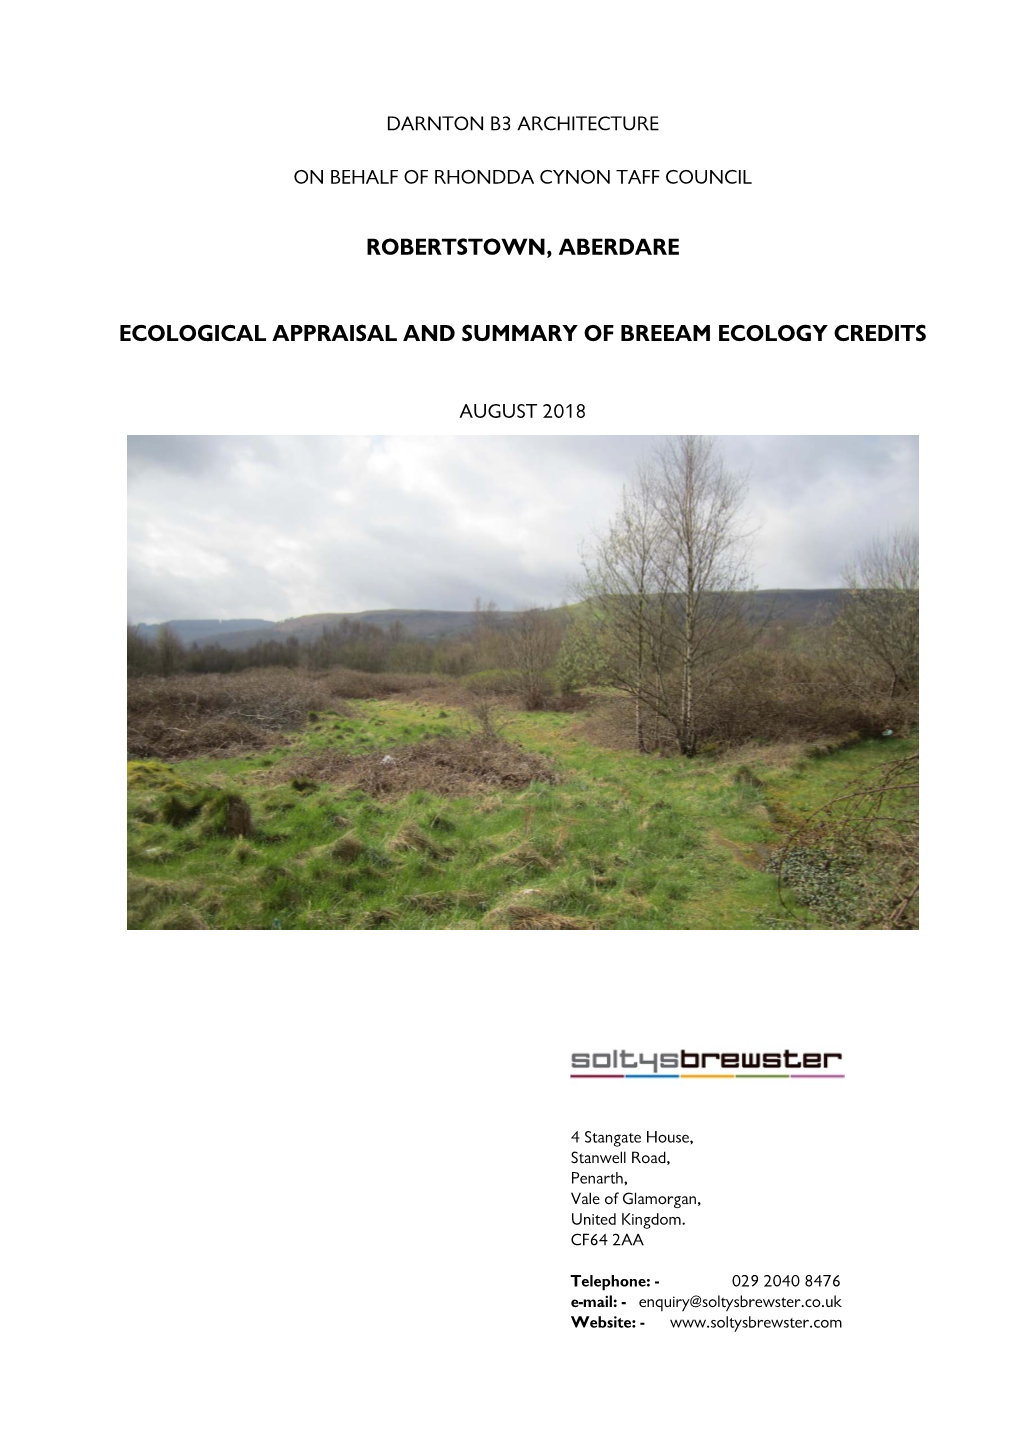 Robertstown, Aberdare Ecological Appraisal and Summary of BREEAM Ecology Credits E1882501/ Doc 01